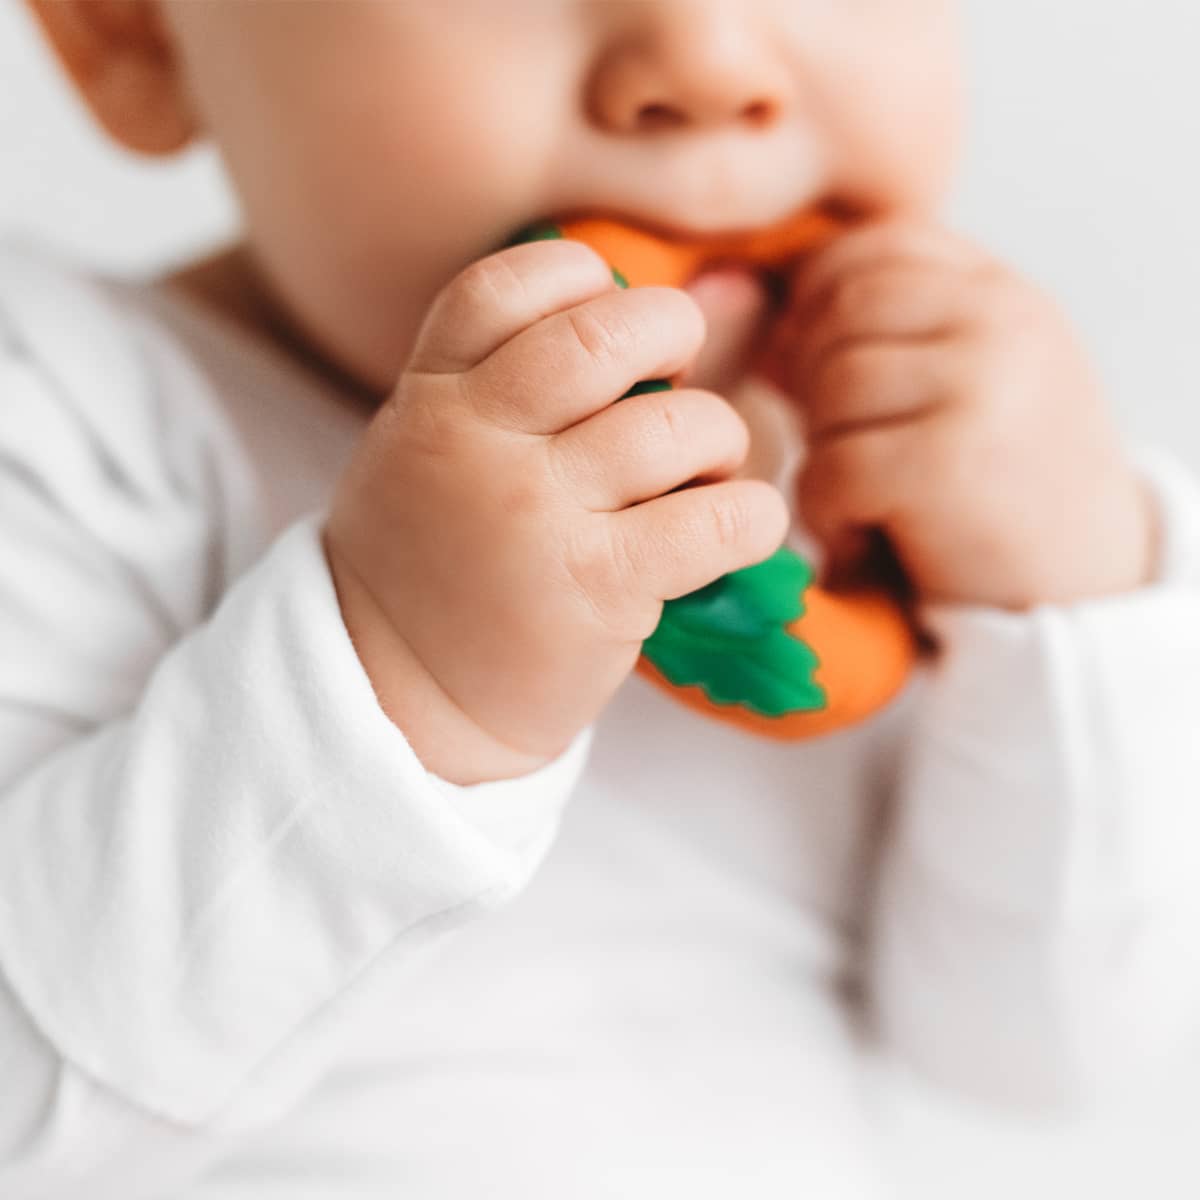 Oli & Carol Natural Rubber Teether - Cathy the Carrot